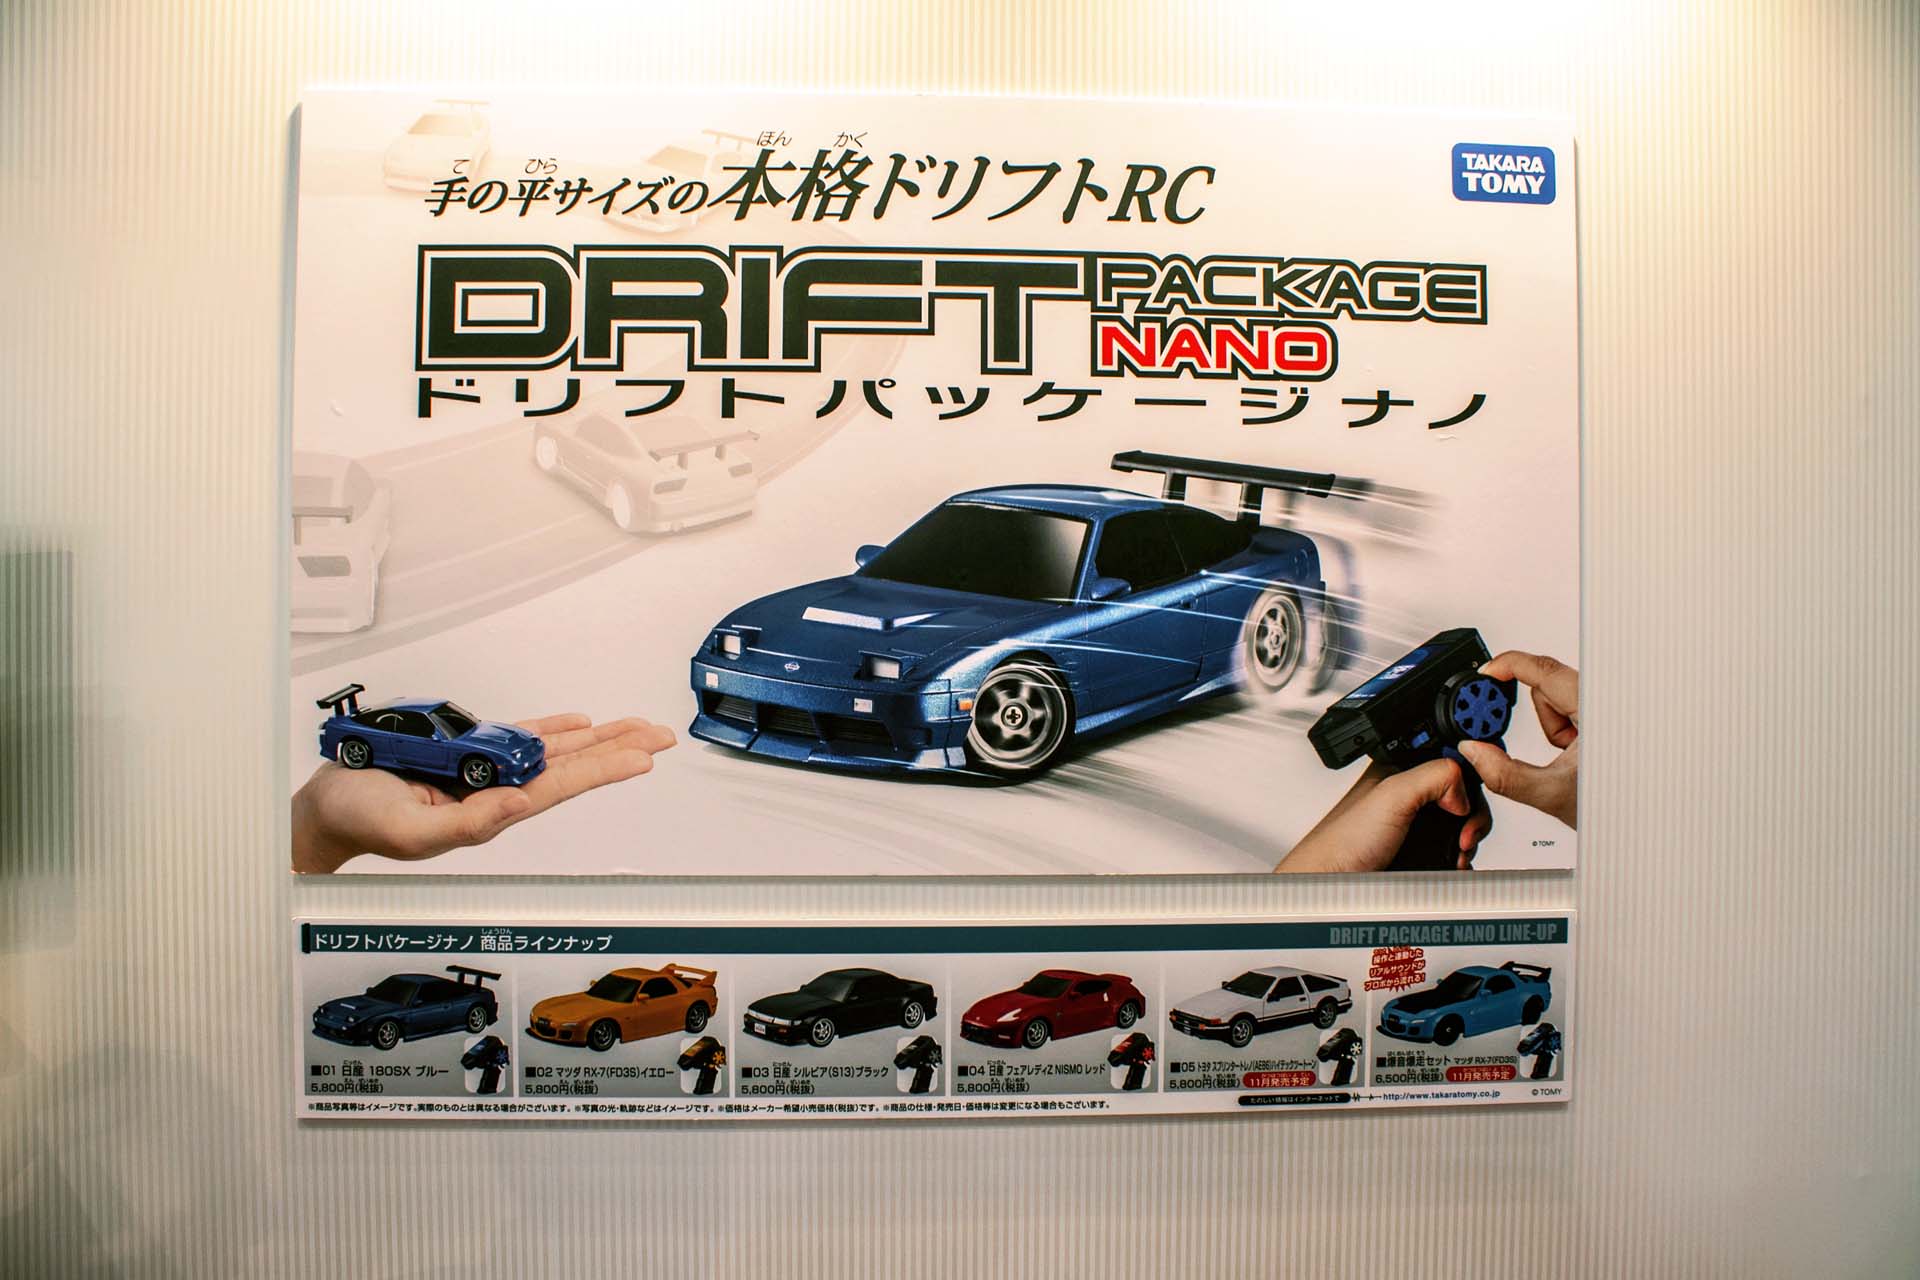 From plain rolling cars, Tomica has expanded into all sorts of car-related stuff. Being Japan, you know what that means: <i>dorifto!</i> These little remote-controlled drift machines were very popular with the crowd.